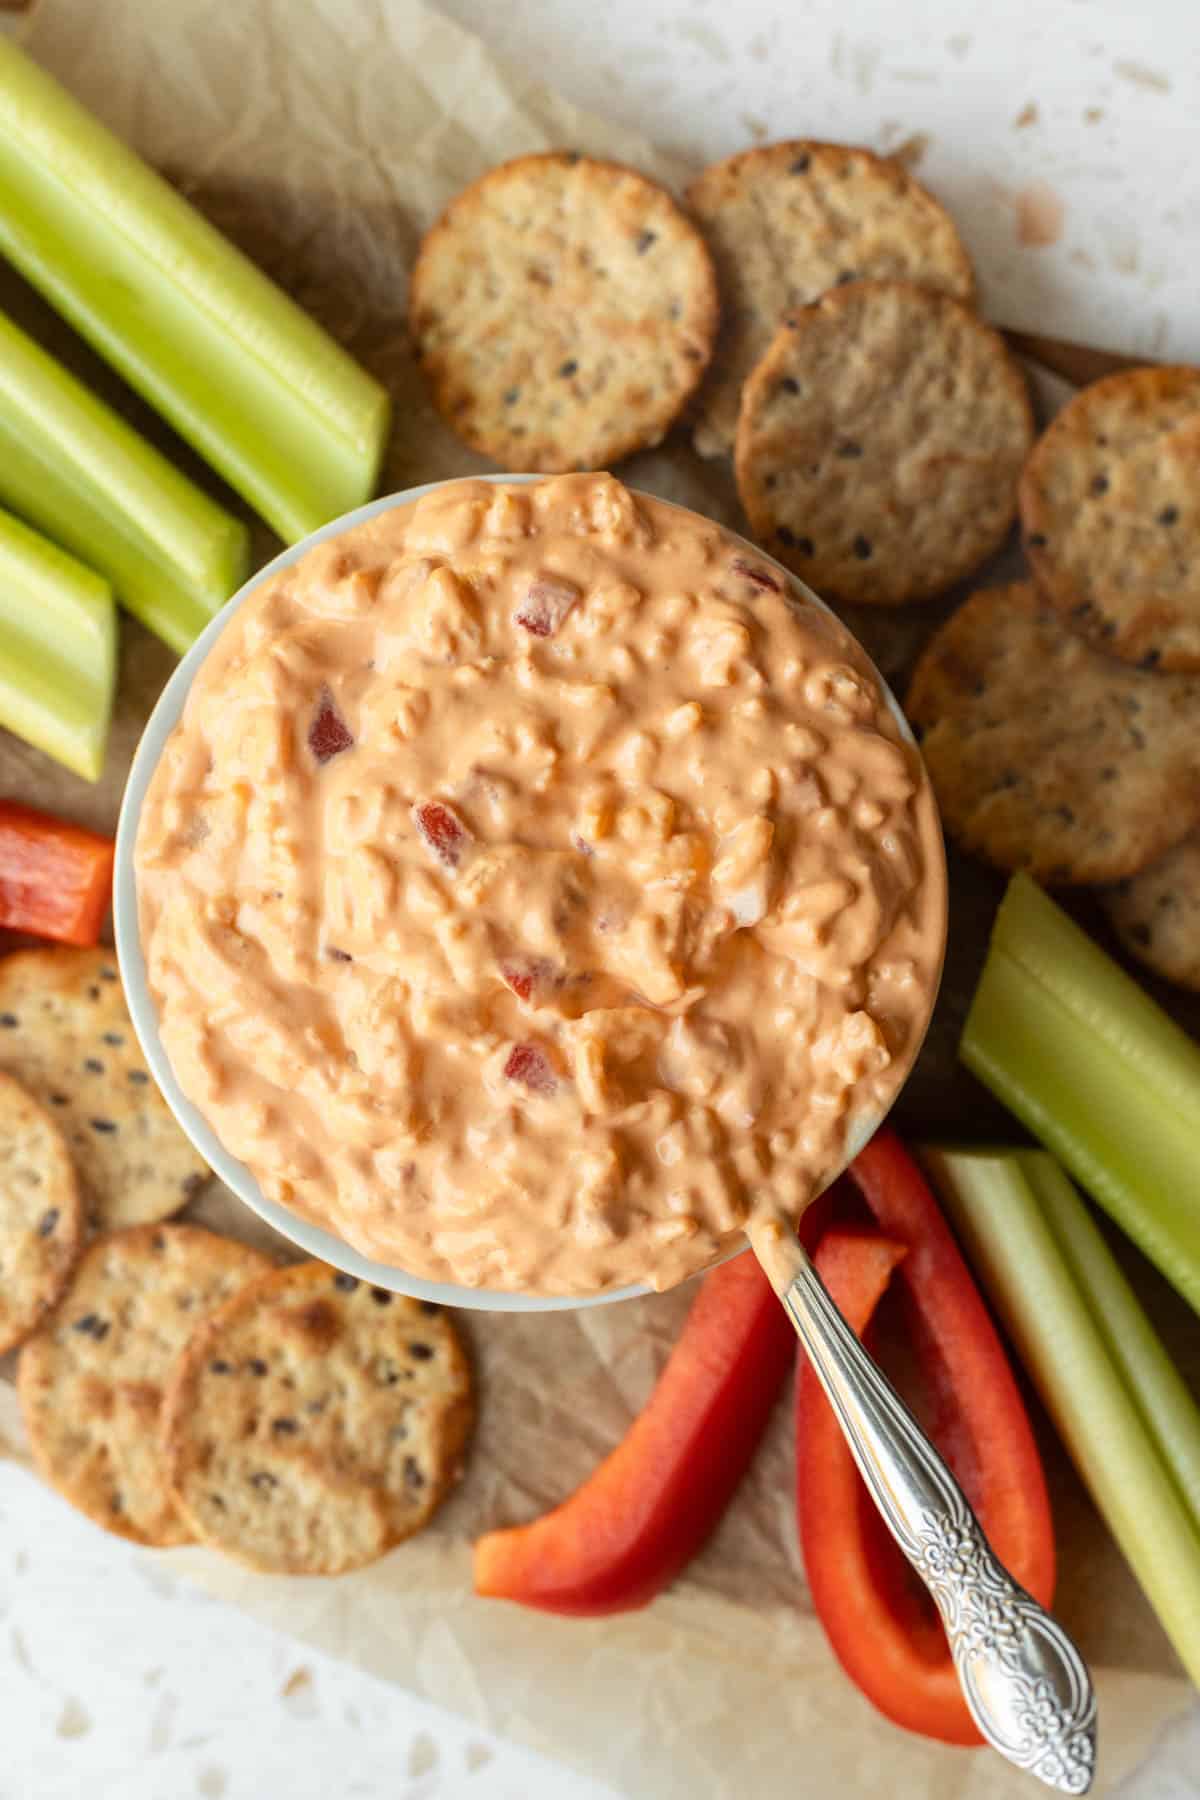 A bowl of vegan pimento cheese surrounded by raw veggies and crackers for dipping.